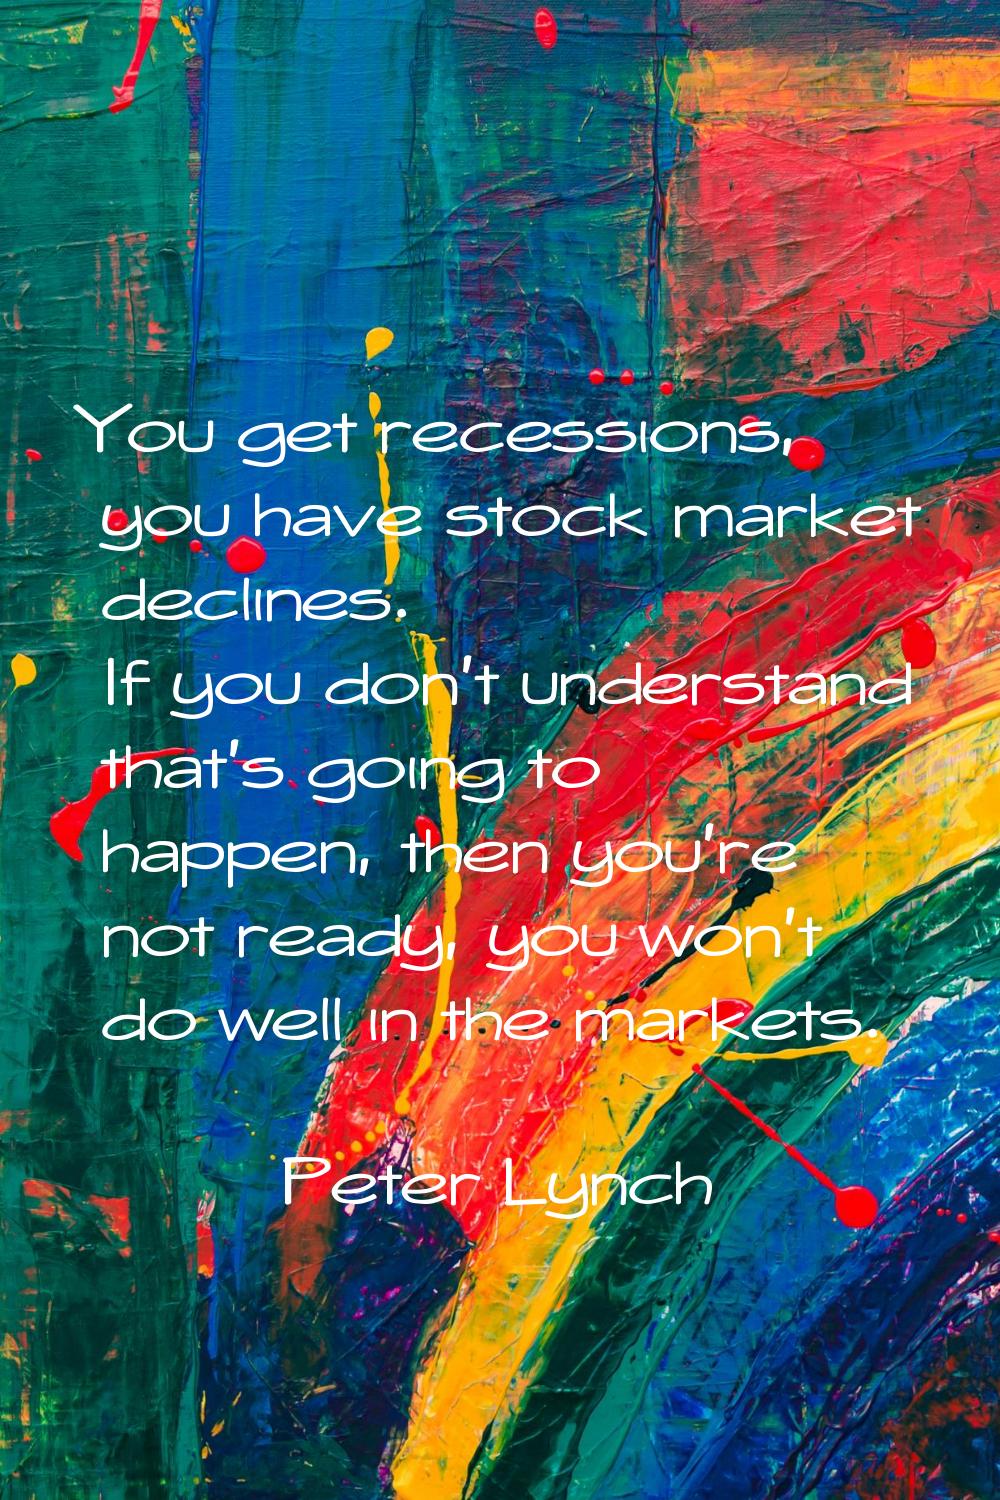 You get recessions, you have stock market declines. If you don't understand that's going to happen,